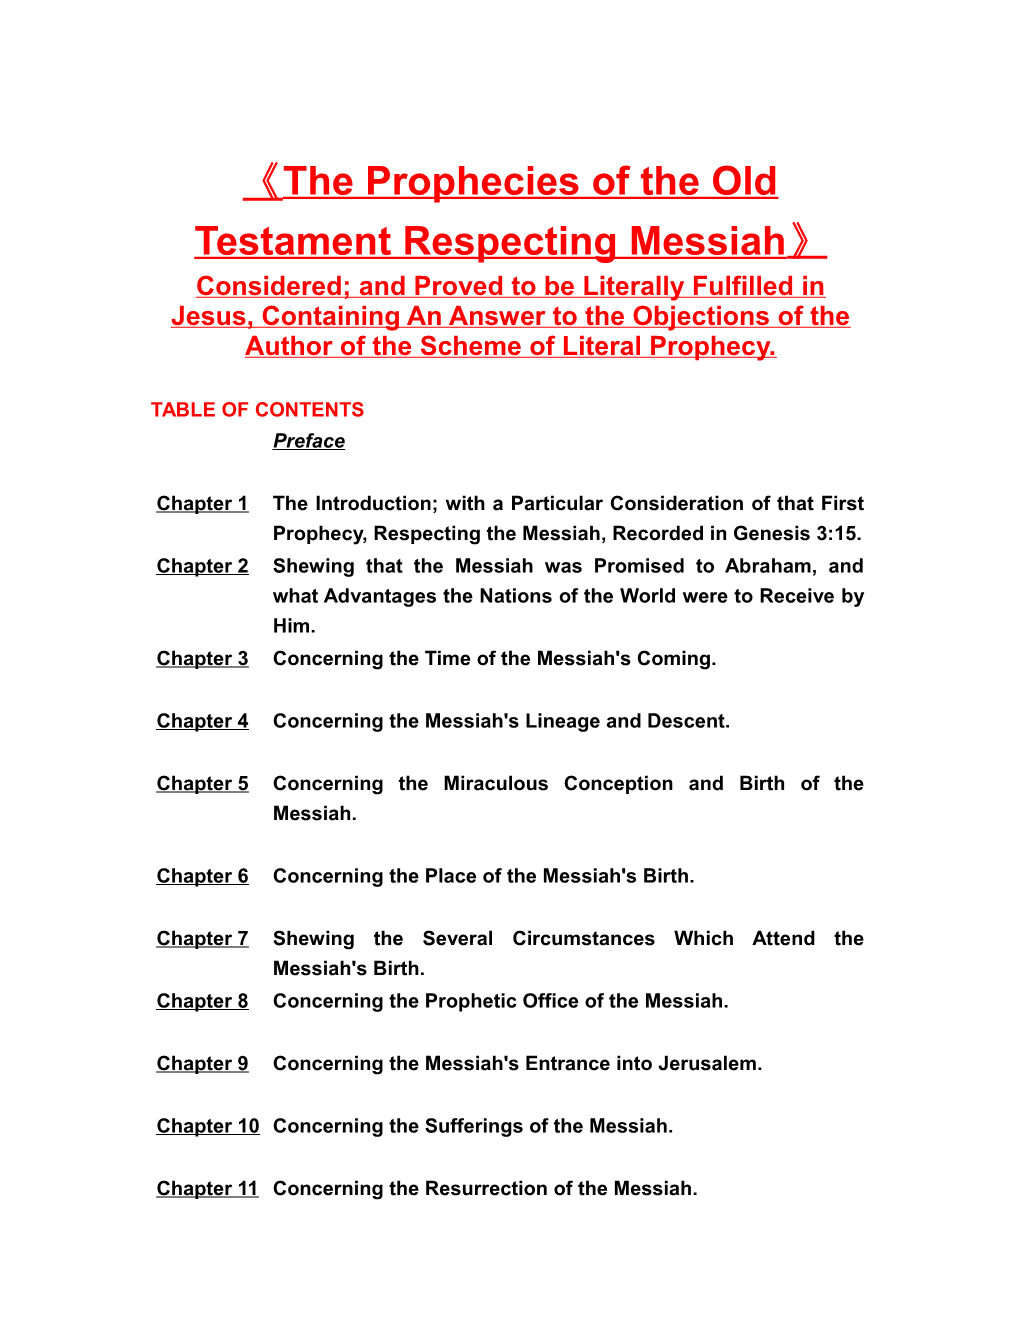 The Prophecies of the Old Testament Respecting Messiah